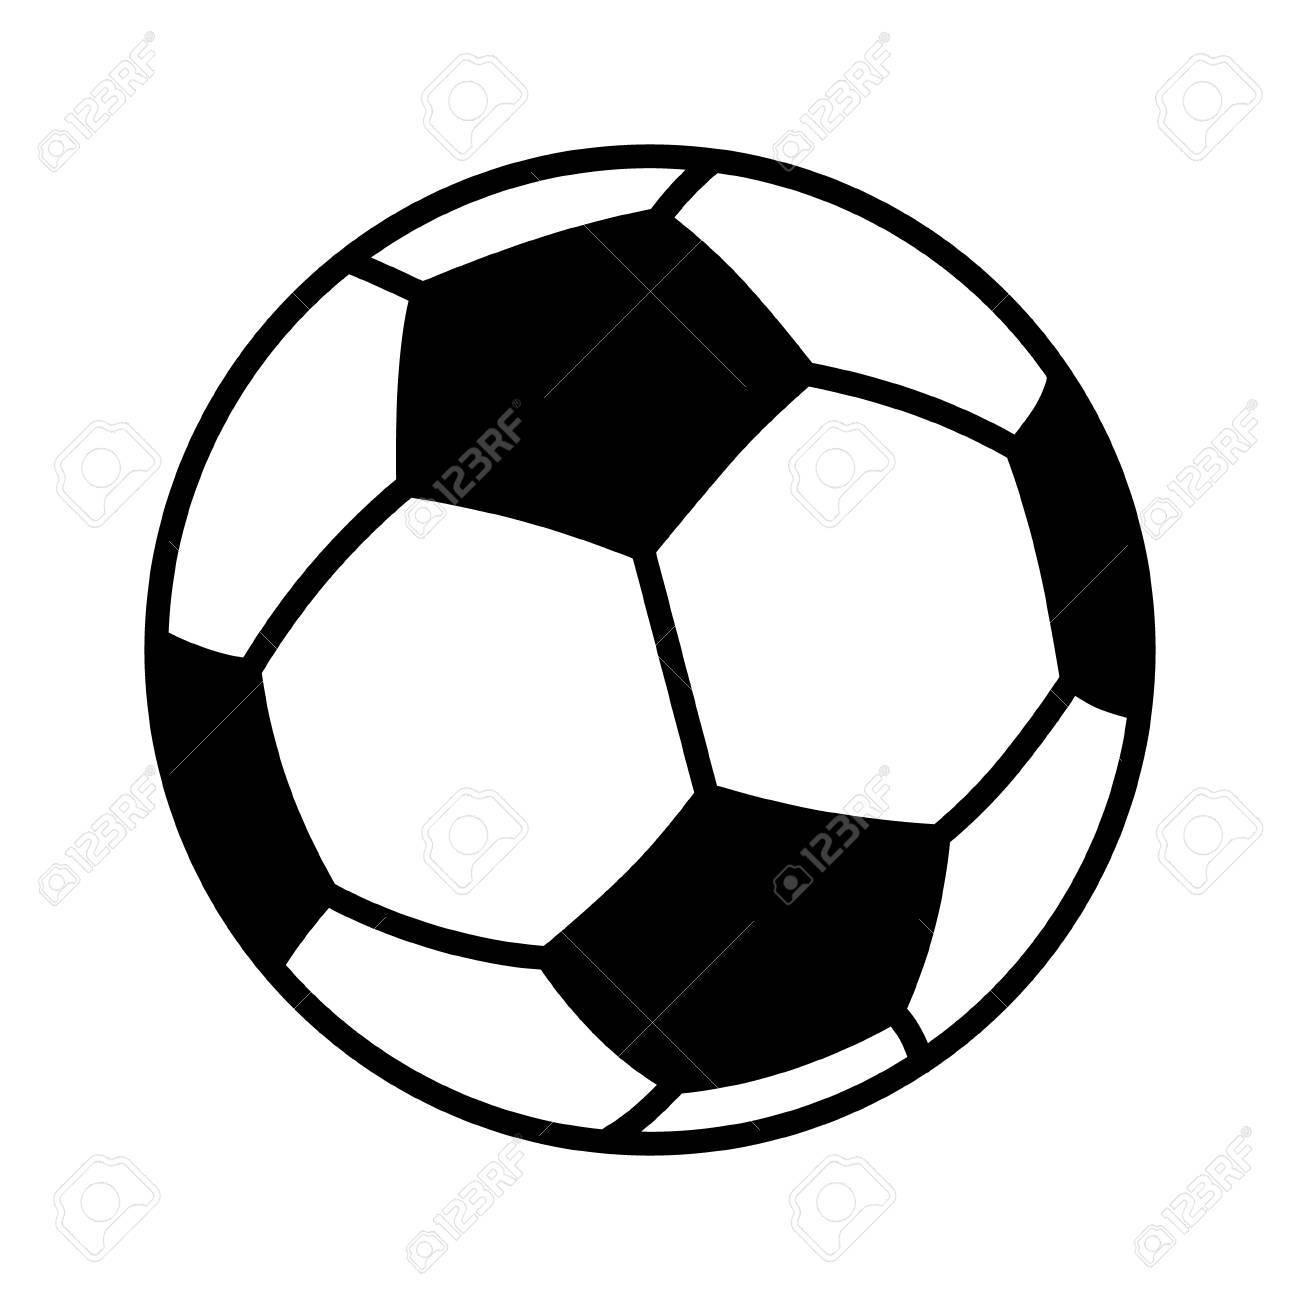 Soccer ball icon, simple style. Soccer ball icon. simple eps 